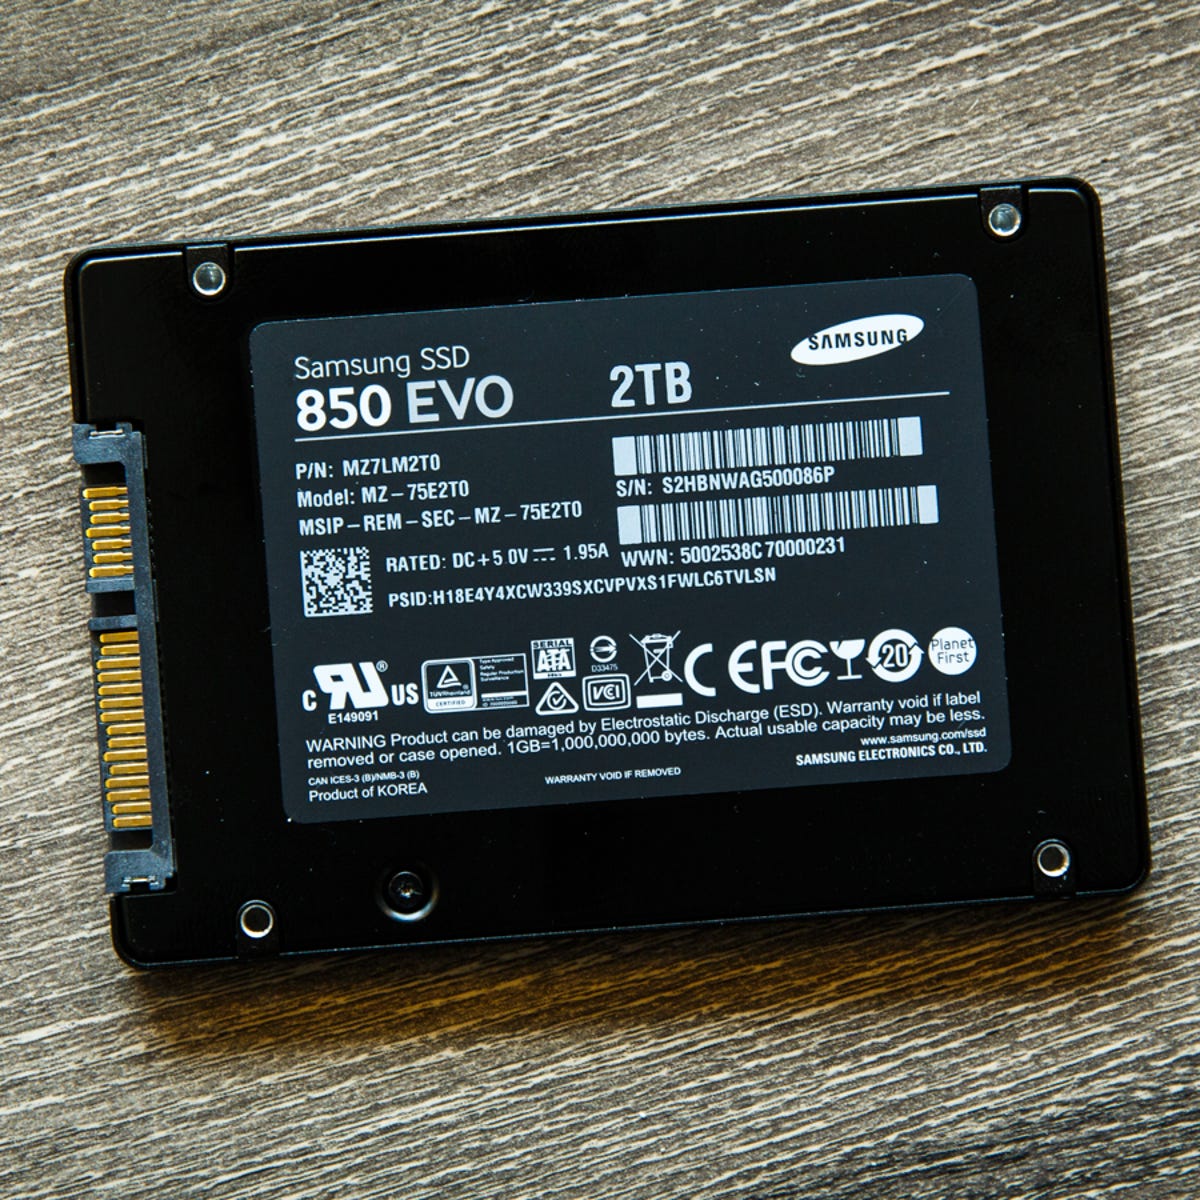 Misuse most Tame Samsung SSD 850 Evo review: Top performance for a low price - CNET